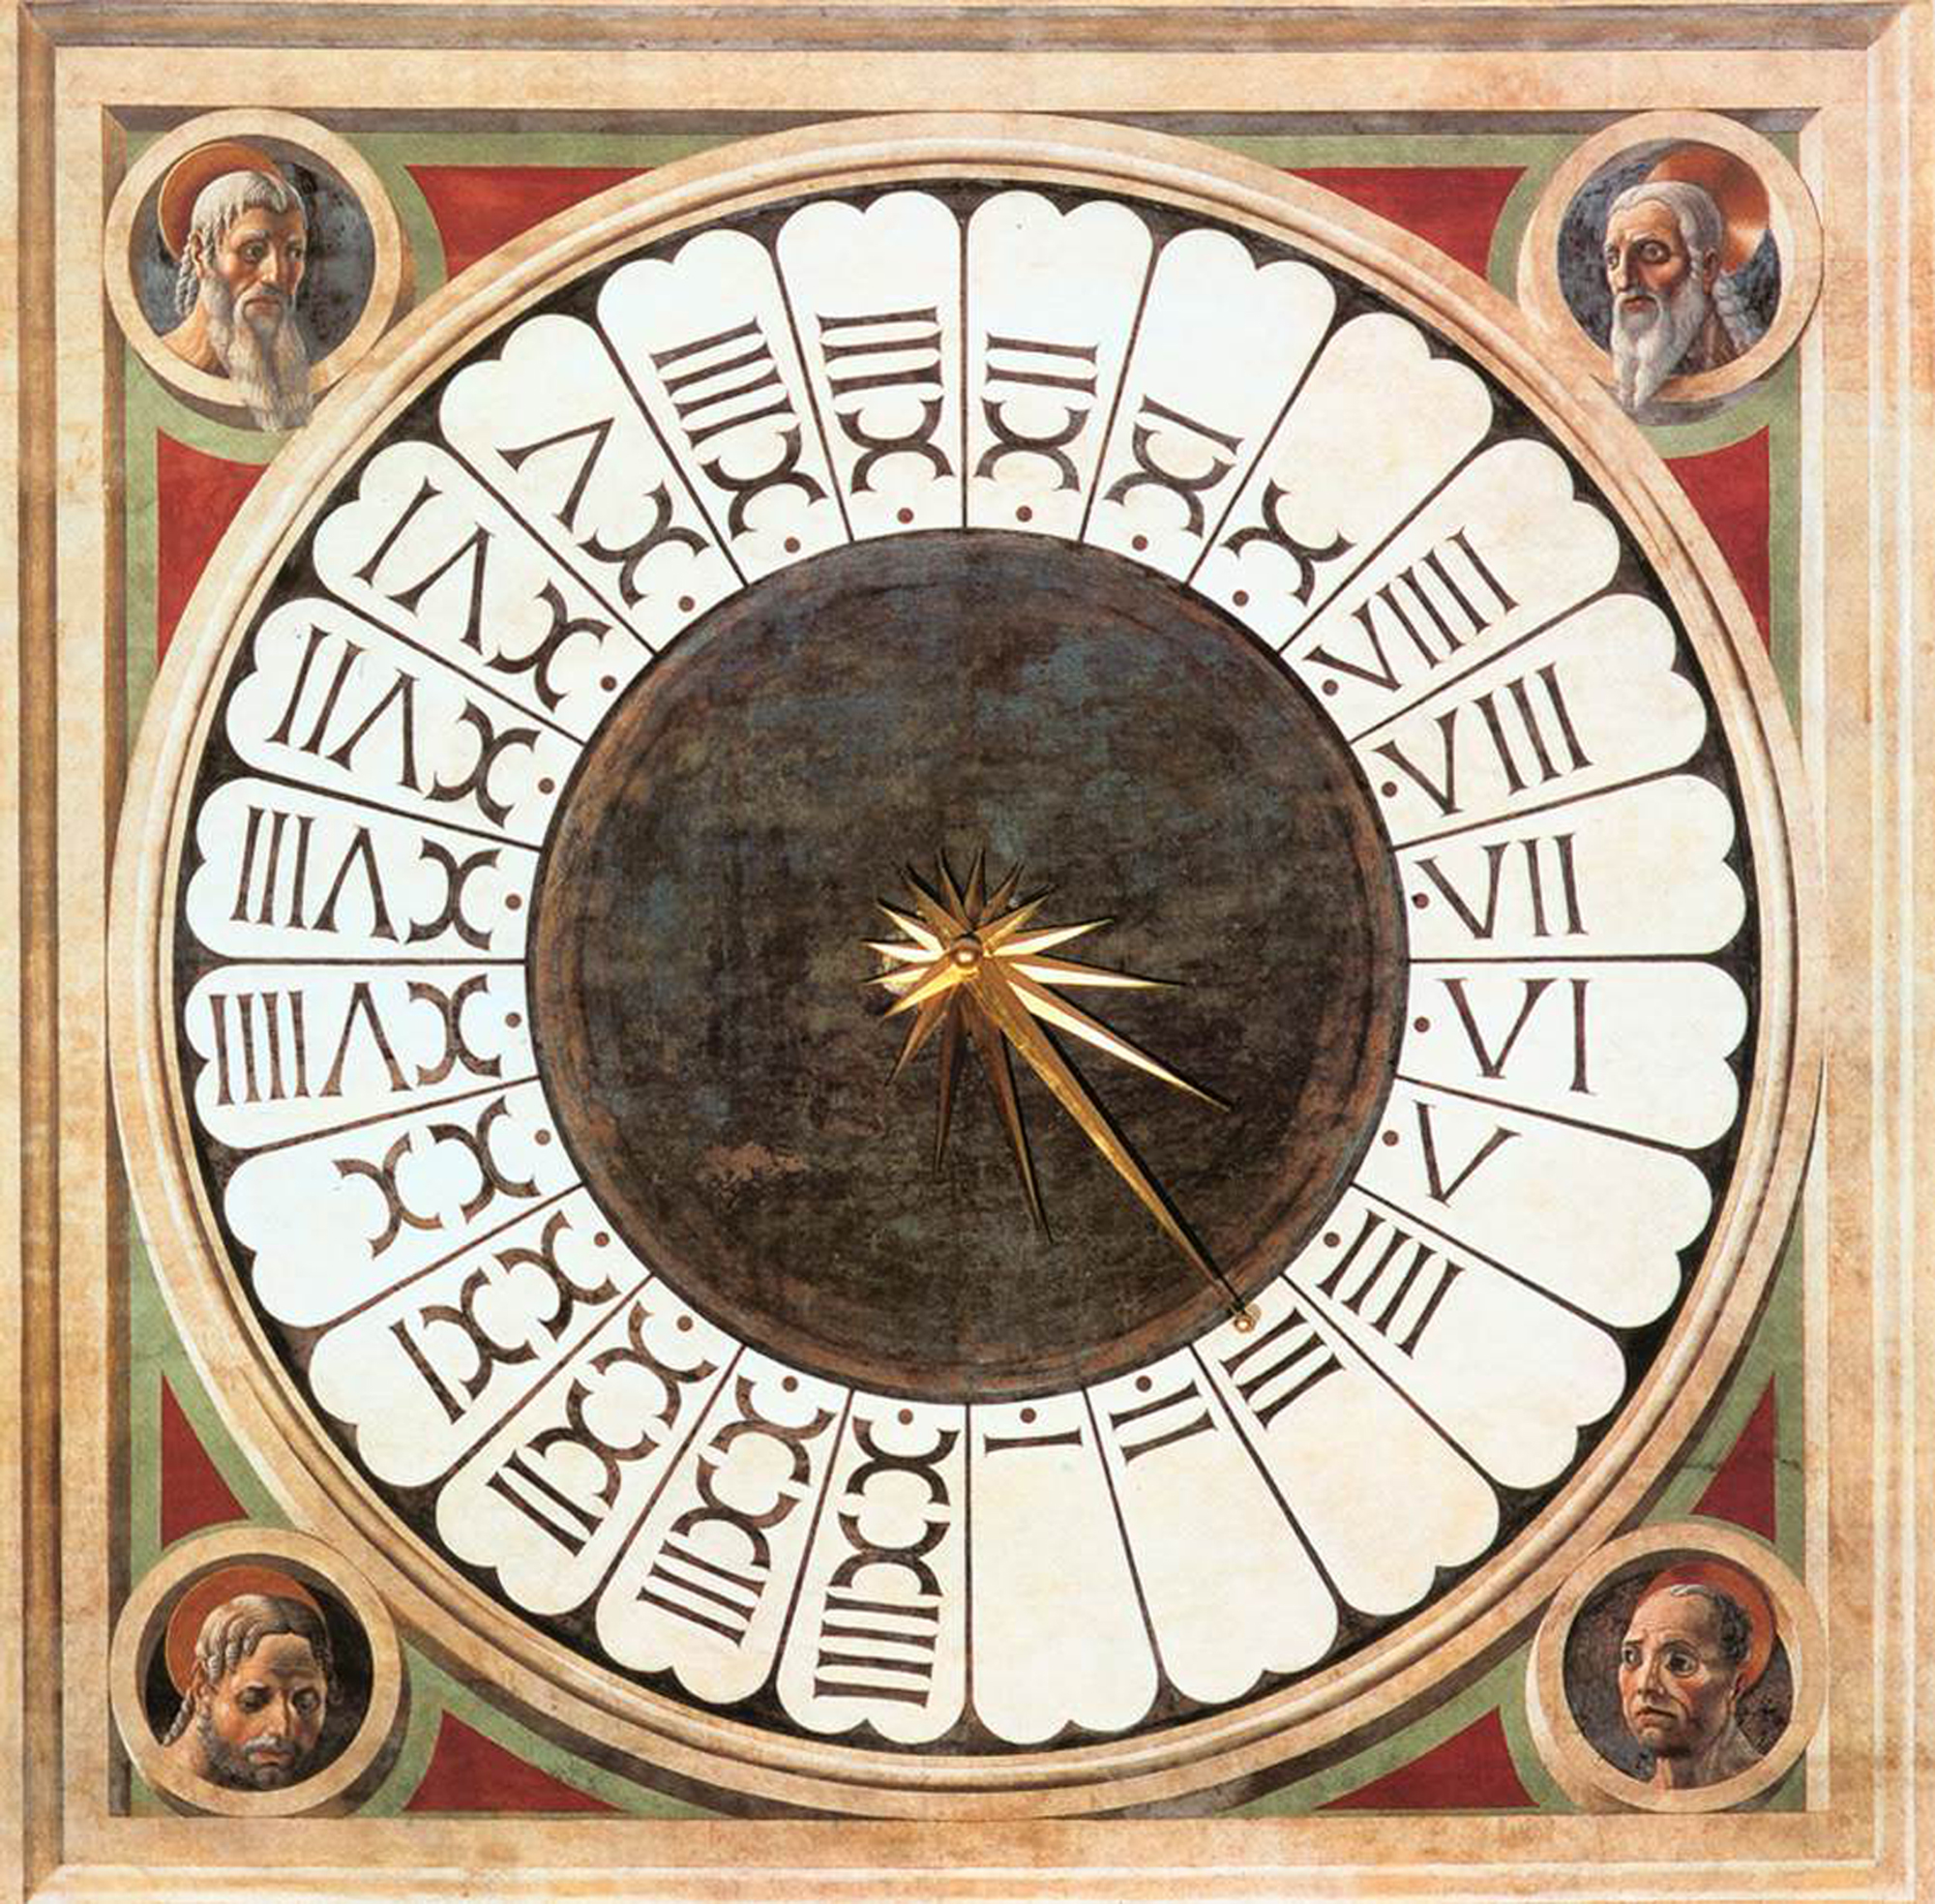 Paolo Uccello. 1443. "Clock with Heads of Prophets." Fresco